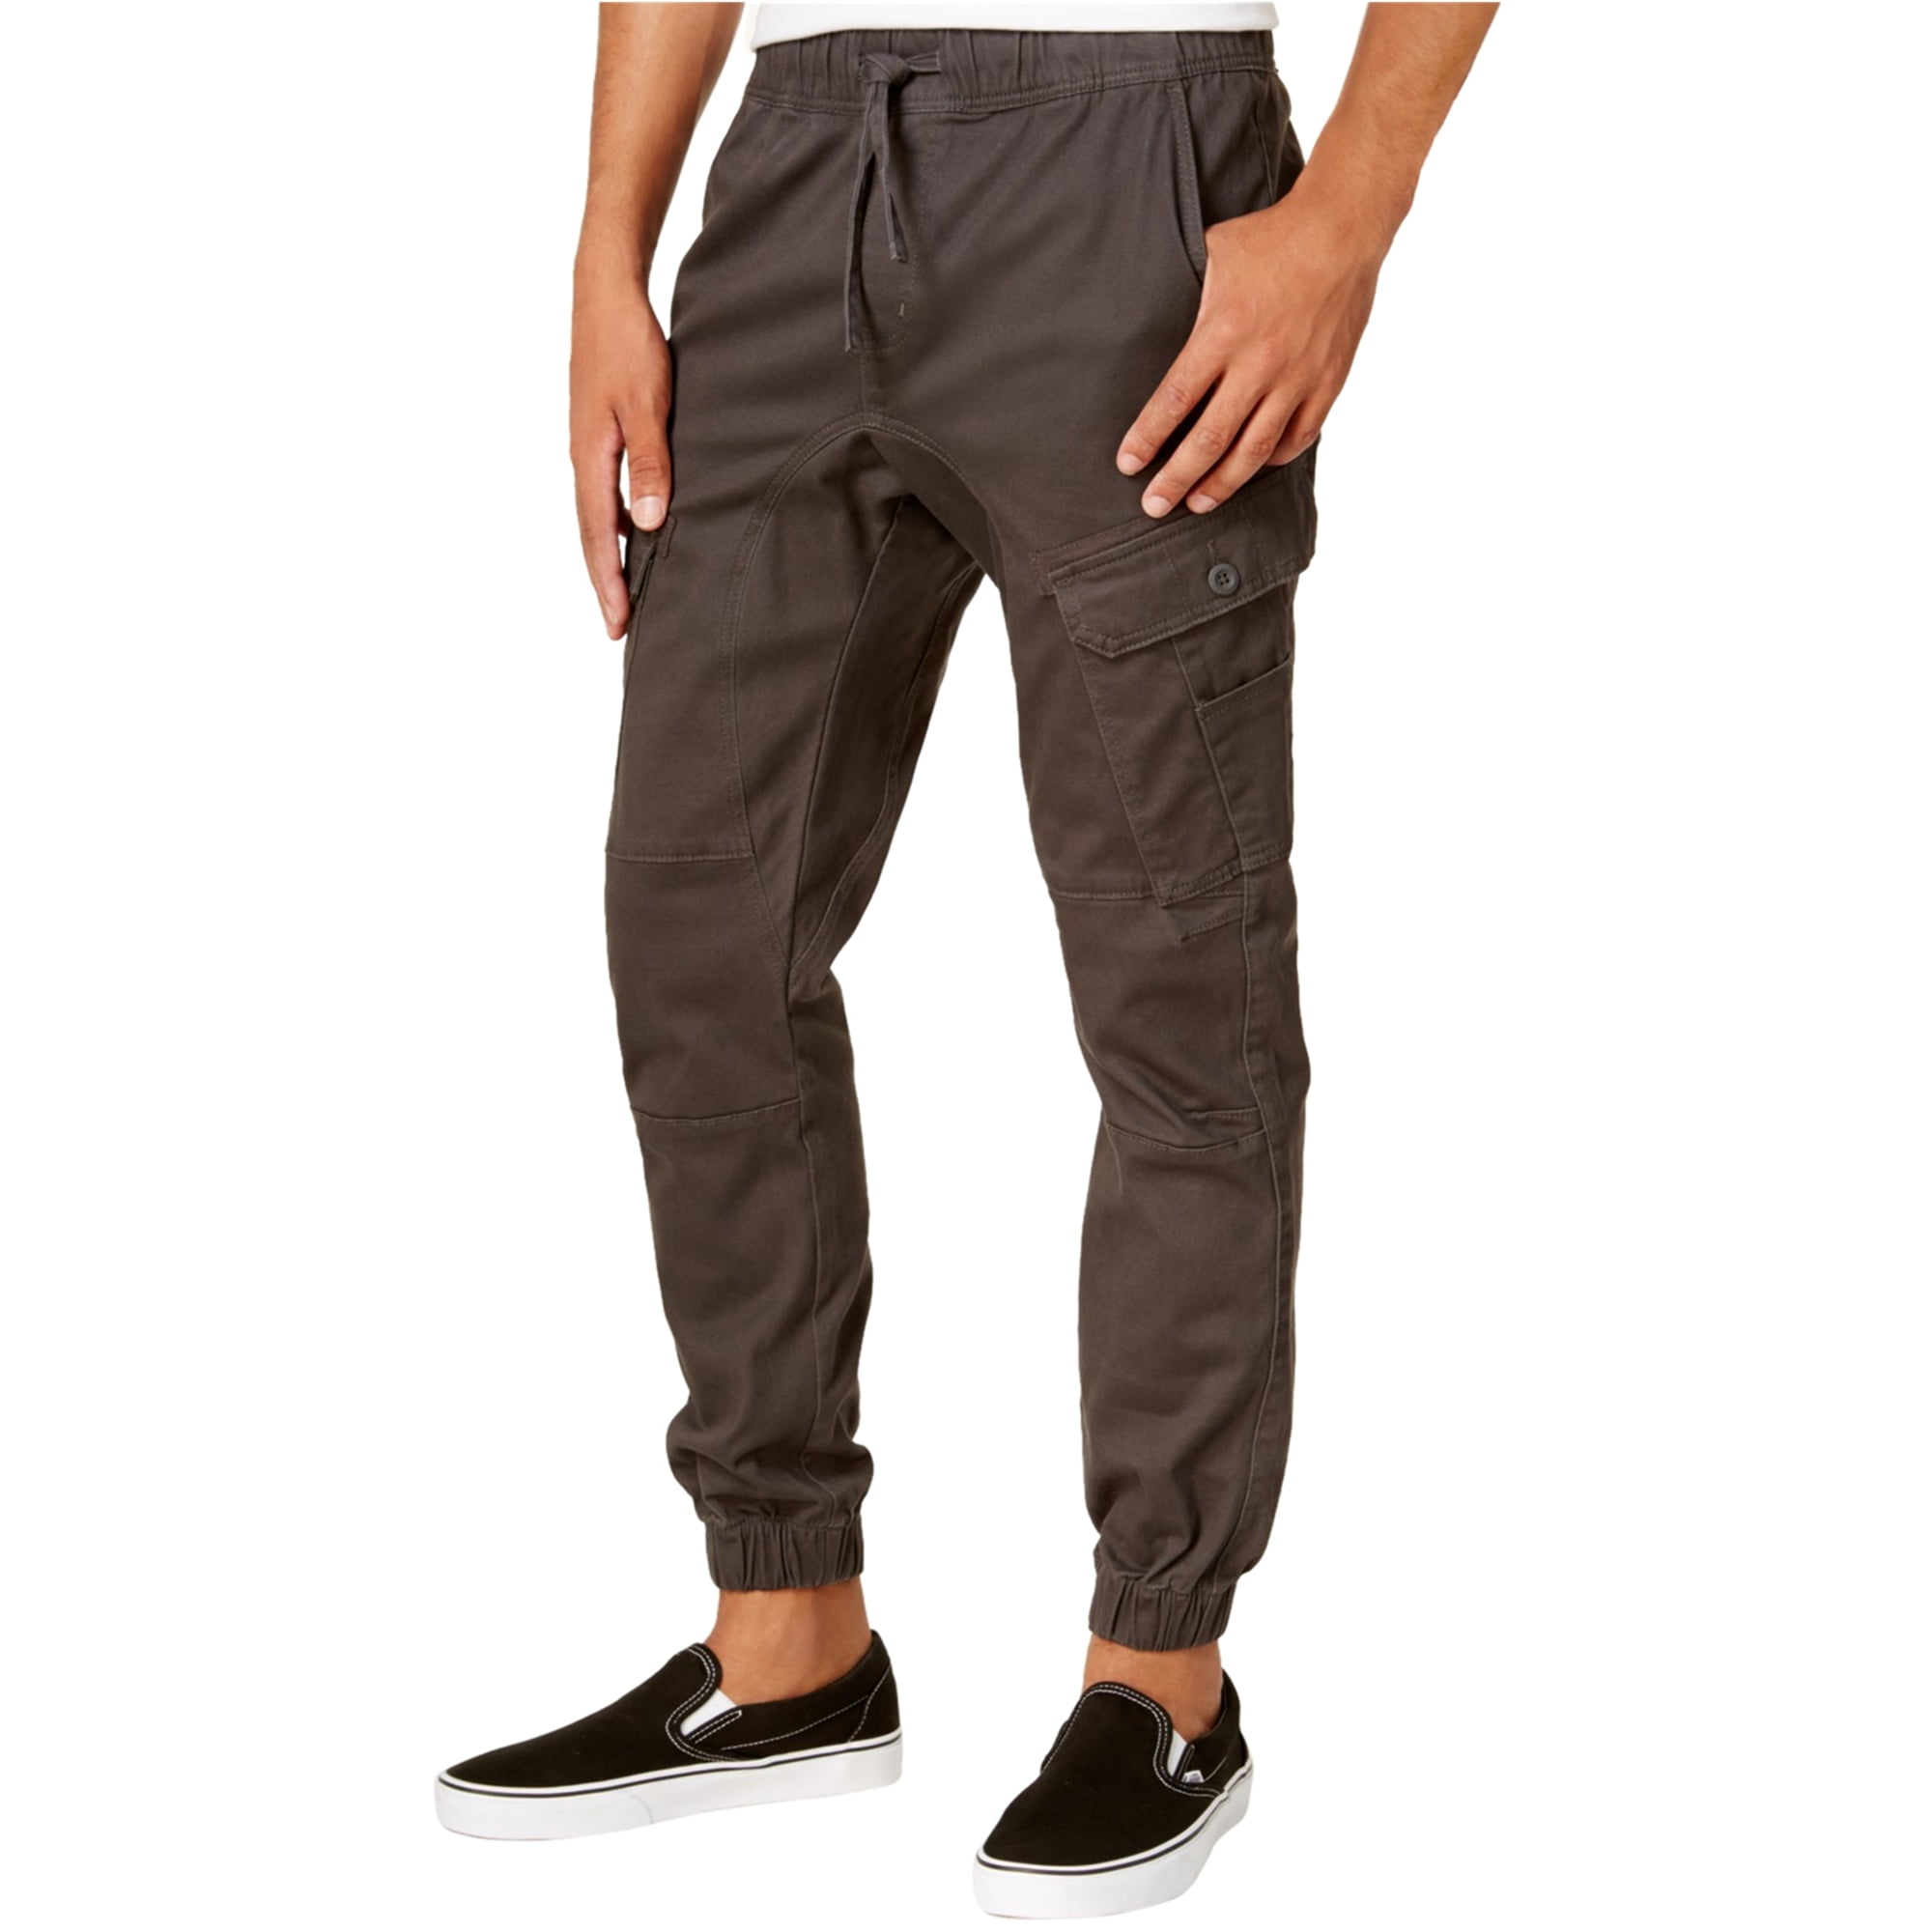 ring of fire cargo pants